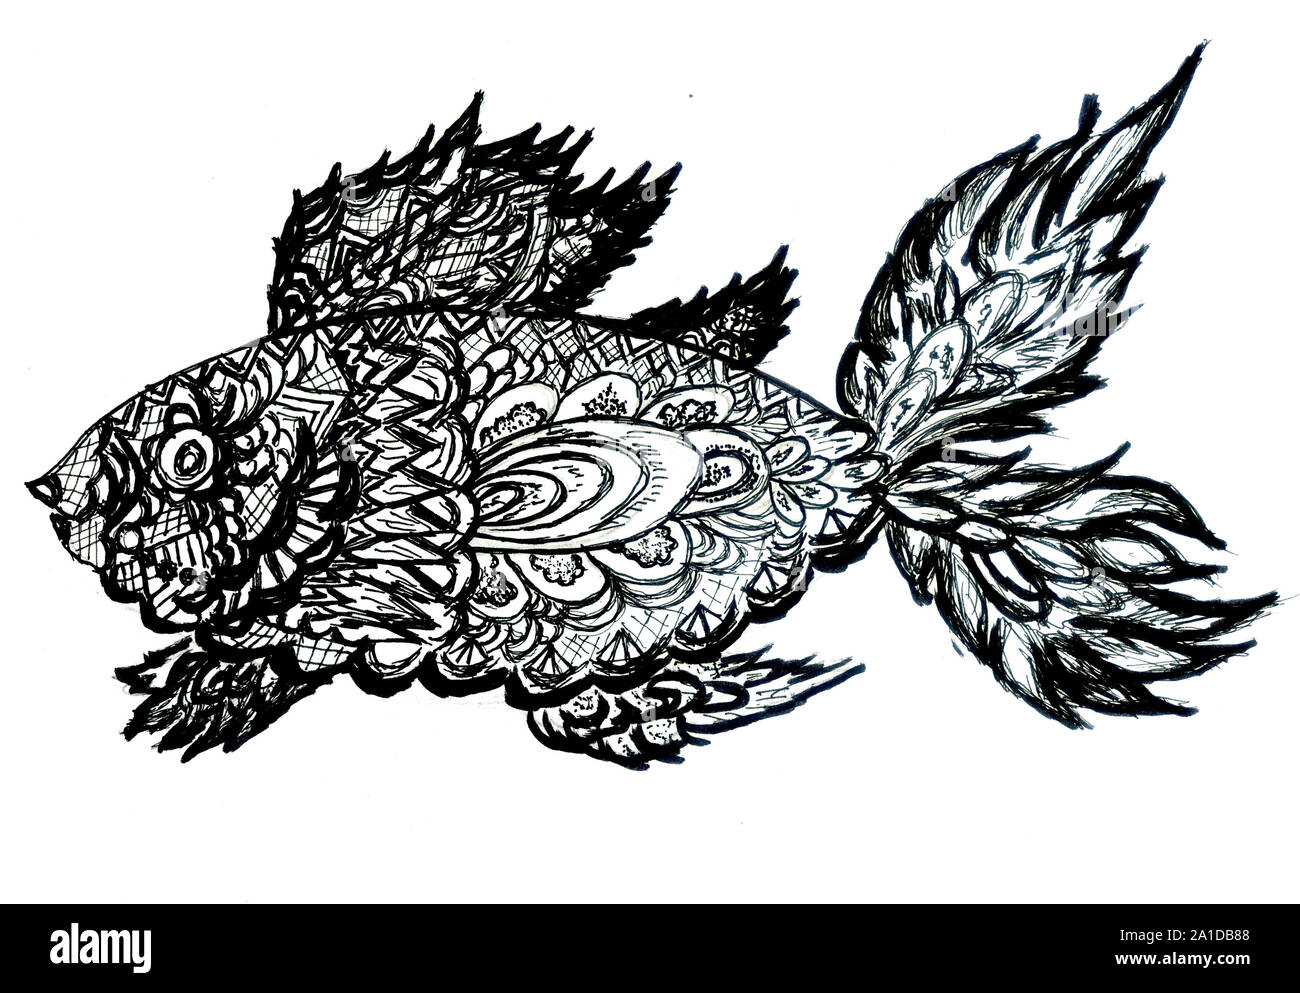 Ornamental graphic fish sketch, abstract zentangle patterns. Stock Photo